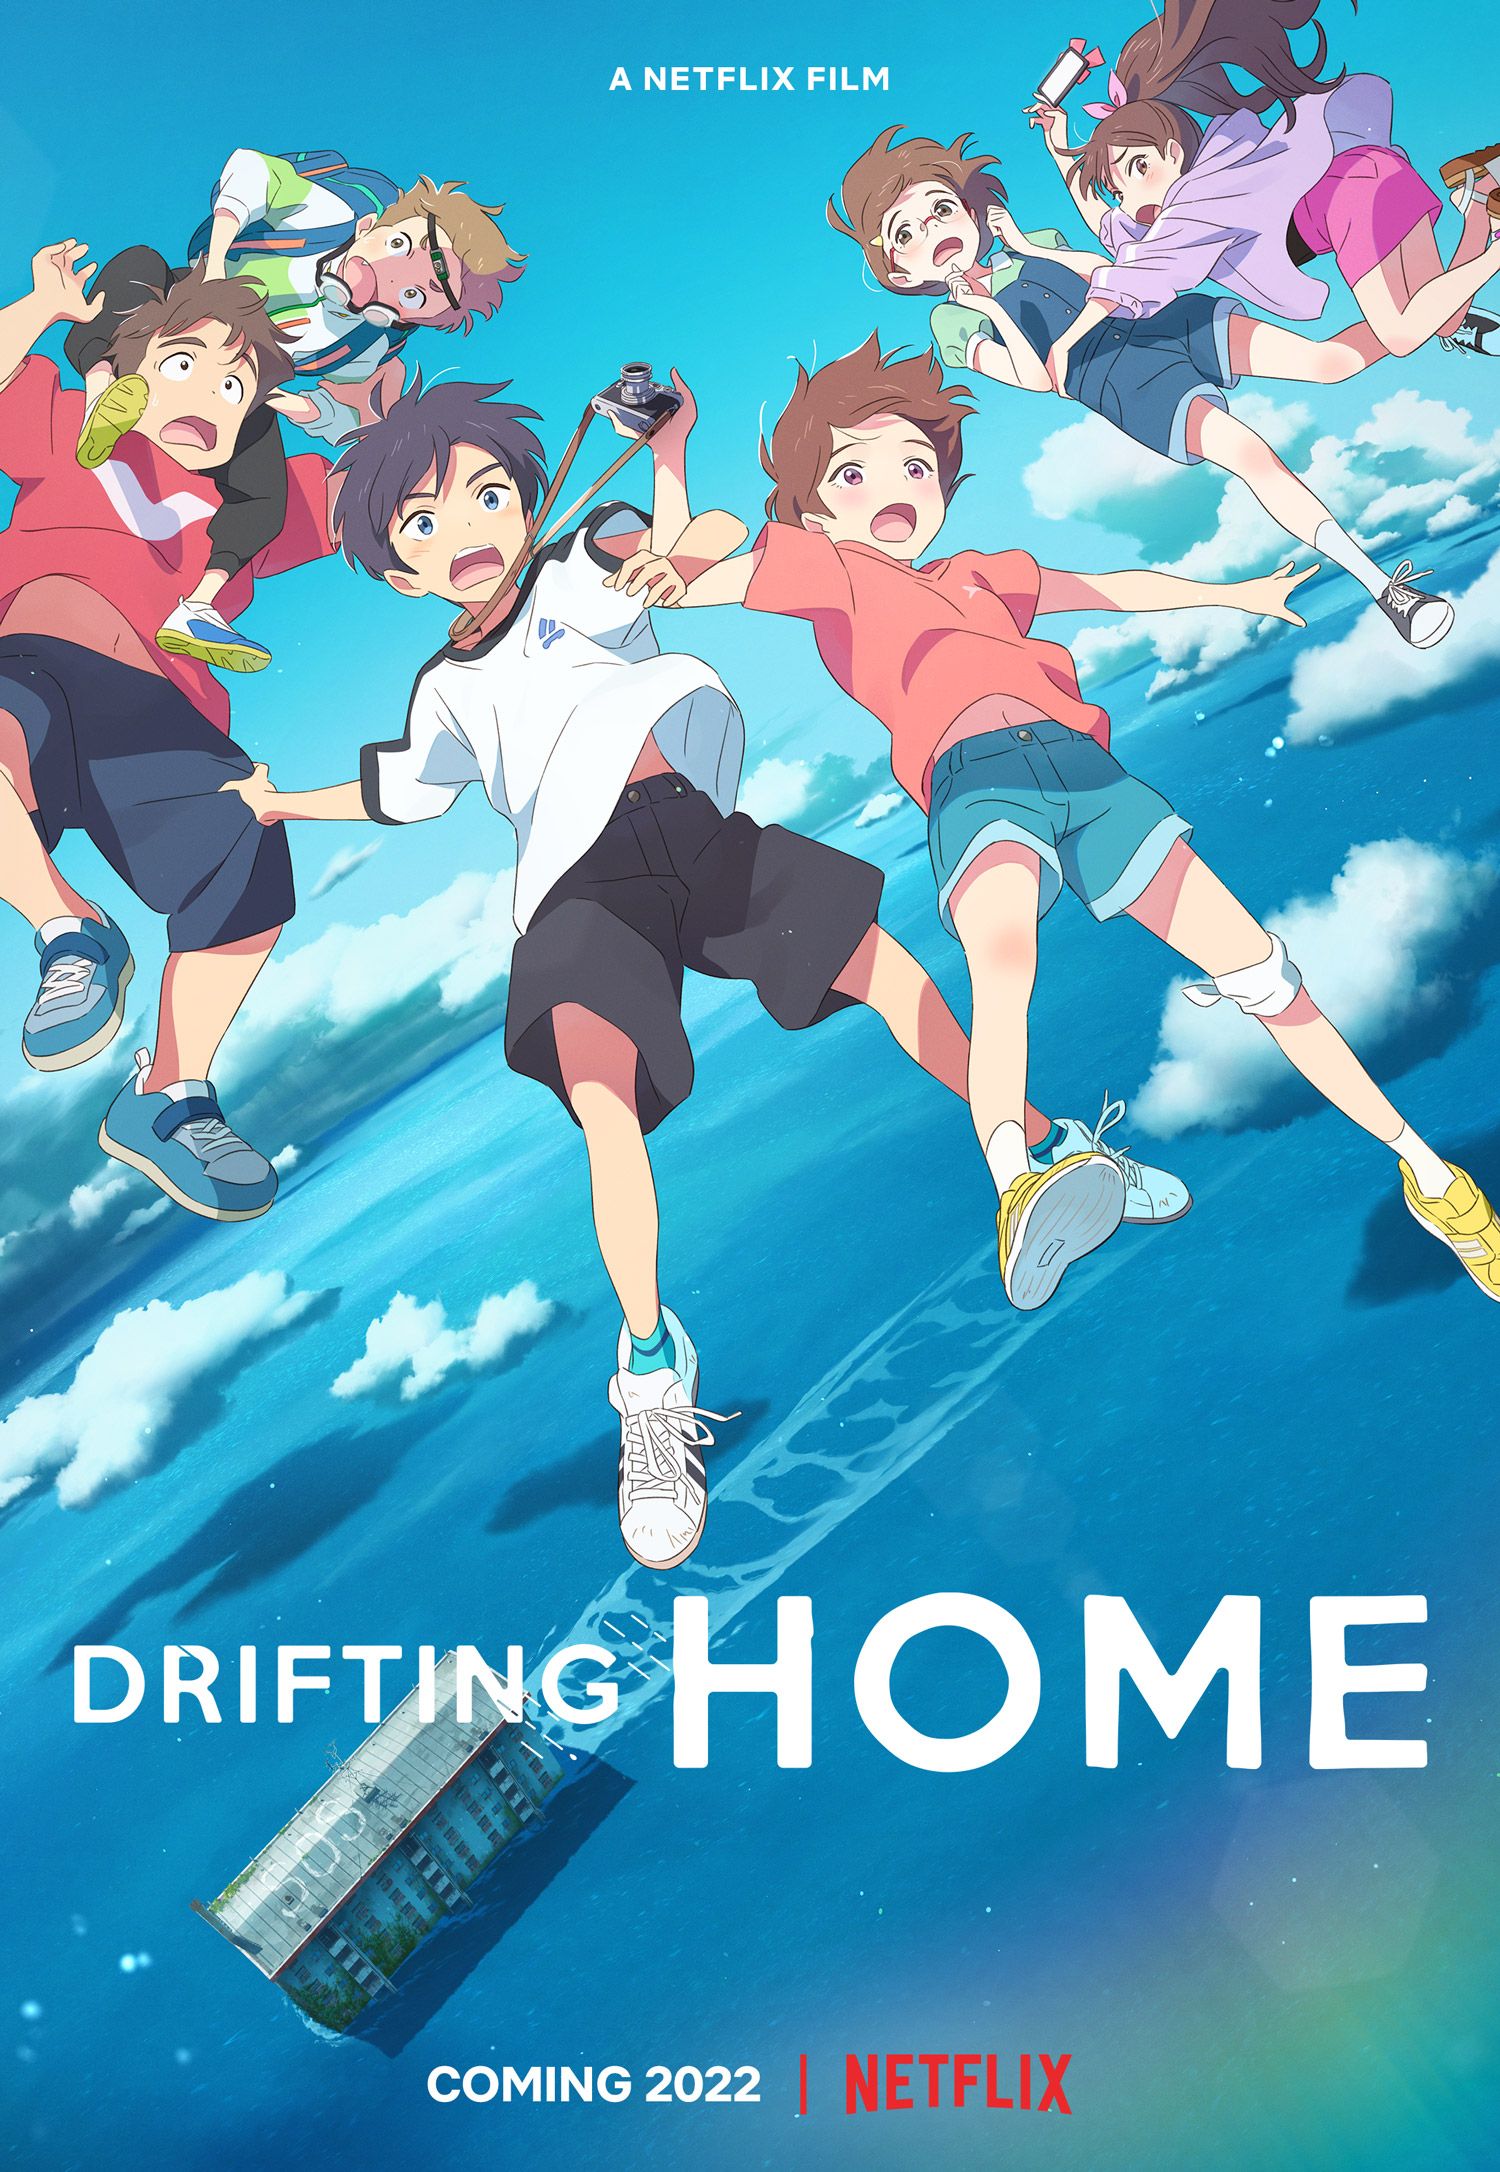 Drifting Home Films Theatrical Release to Add Teaser for Studio Coloridos  Next Work  News  Anime News Network